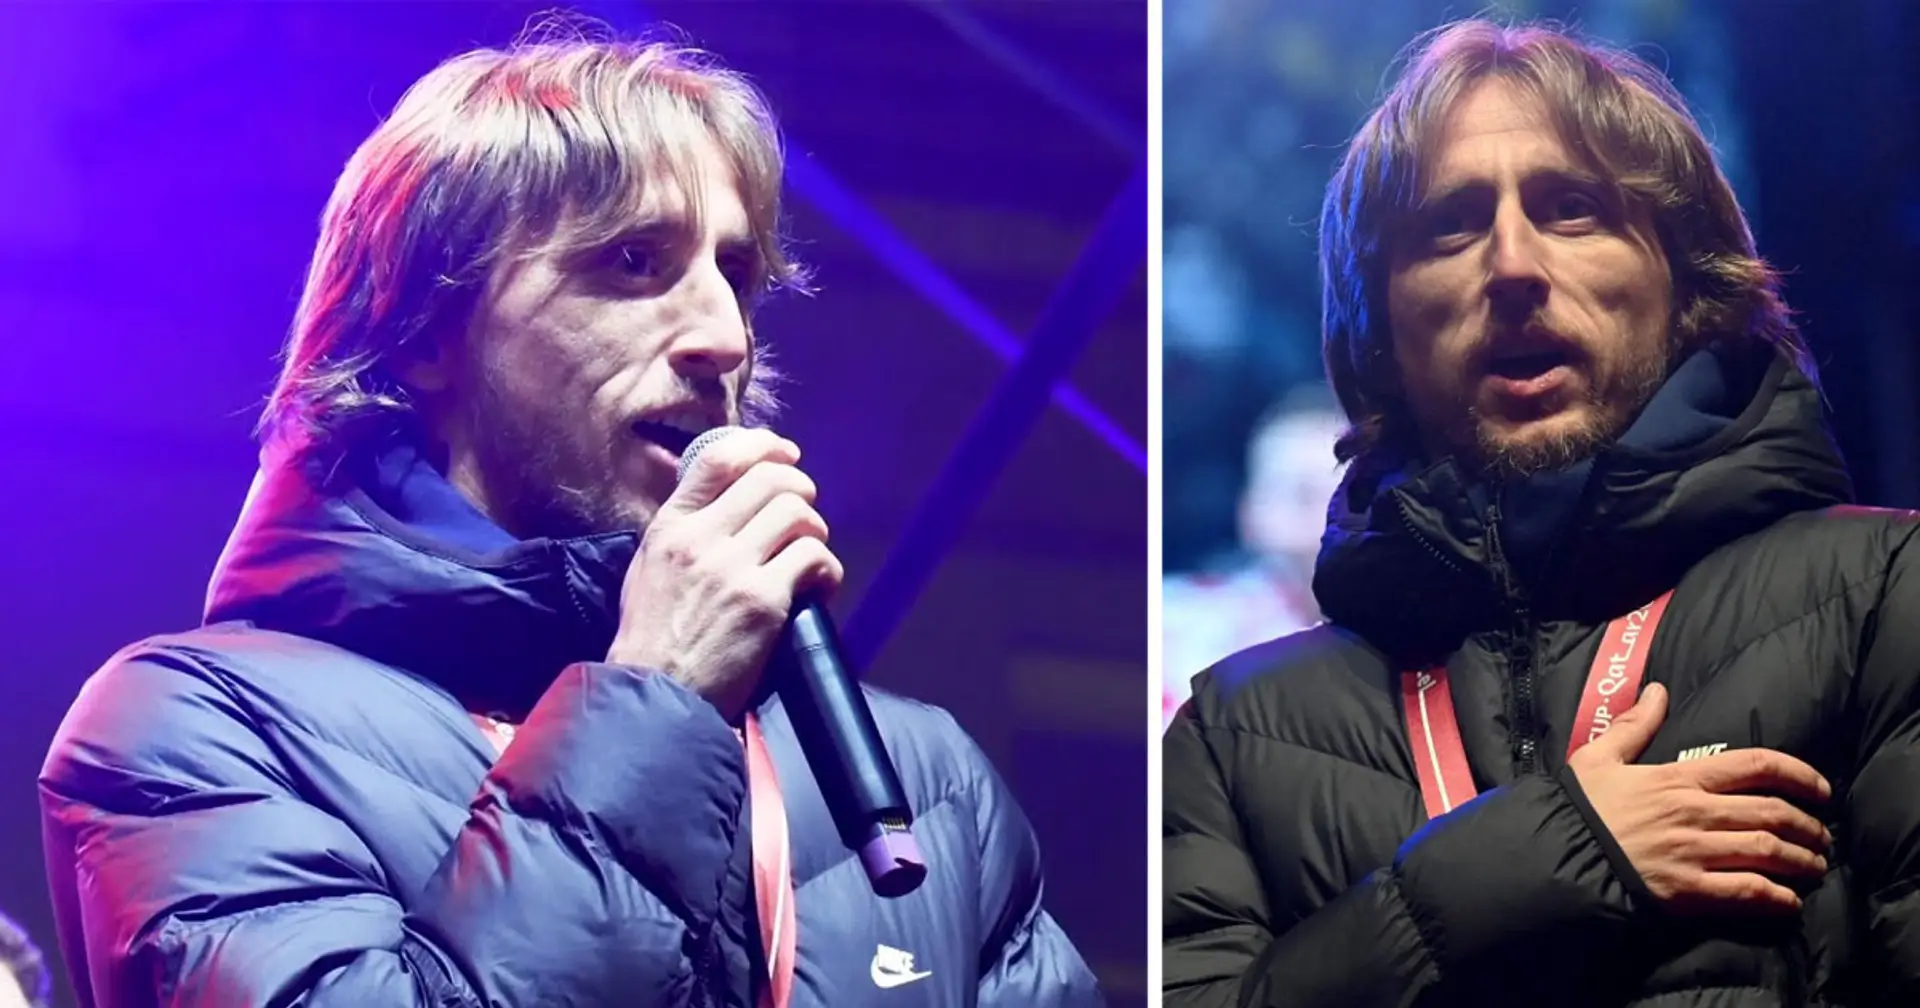 Modric reportedly cuts holiday short as he wants to be available for Valladolid game